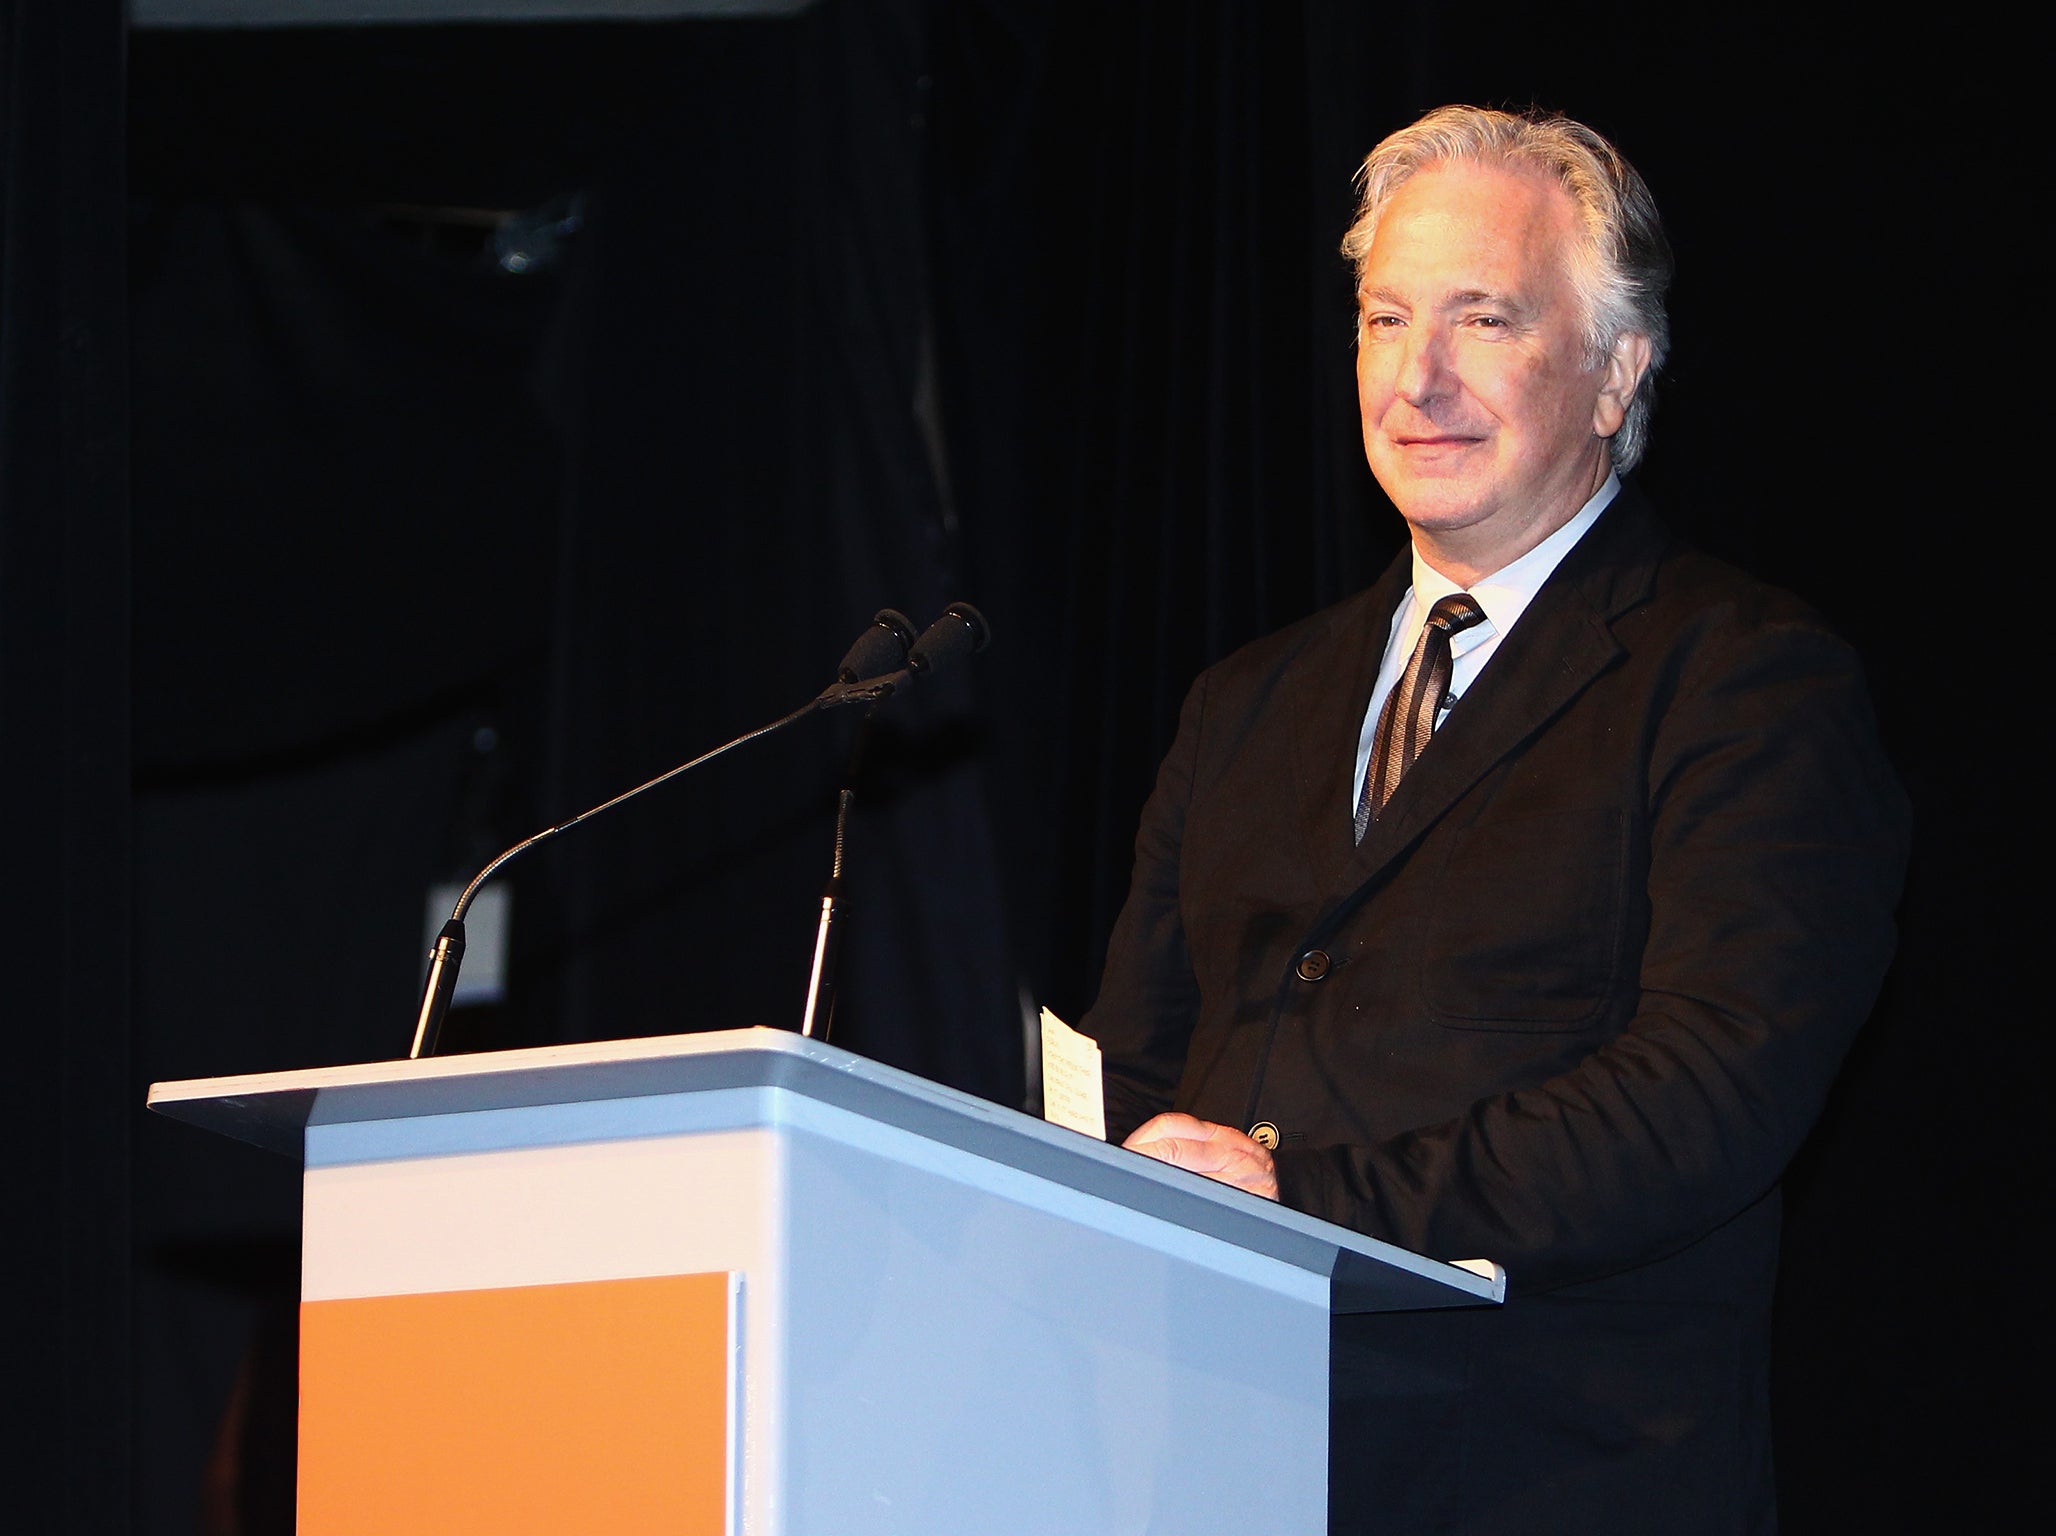 Director/actor Alan Rickman speaks onstage at the 'A Little Chaos' premiere introduction during the 2014 Toronto International Film Festival at Roy Thomson Hall on September 13, 2014 in Toronto, Canada